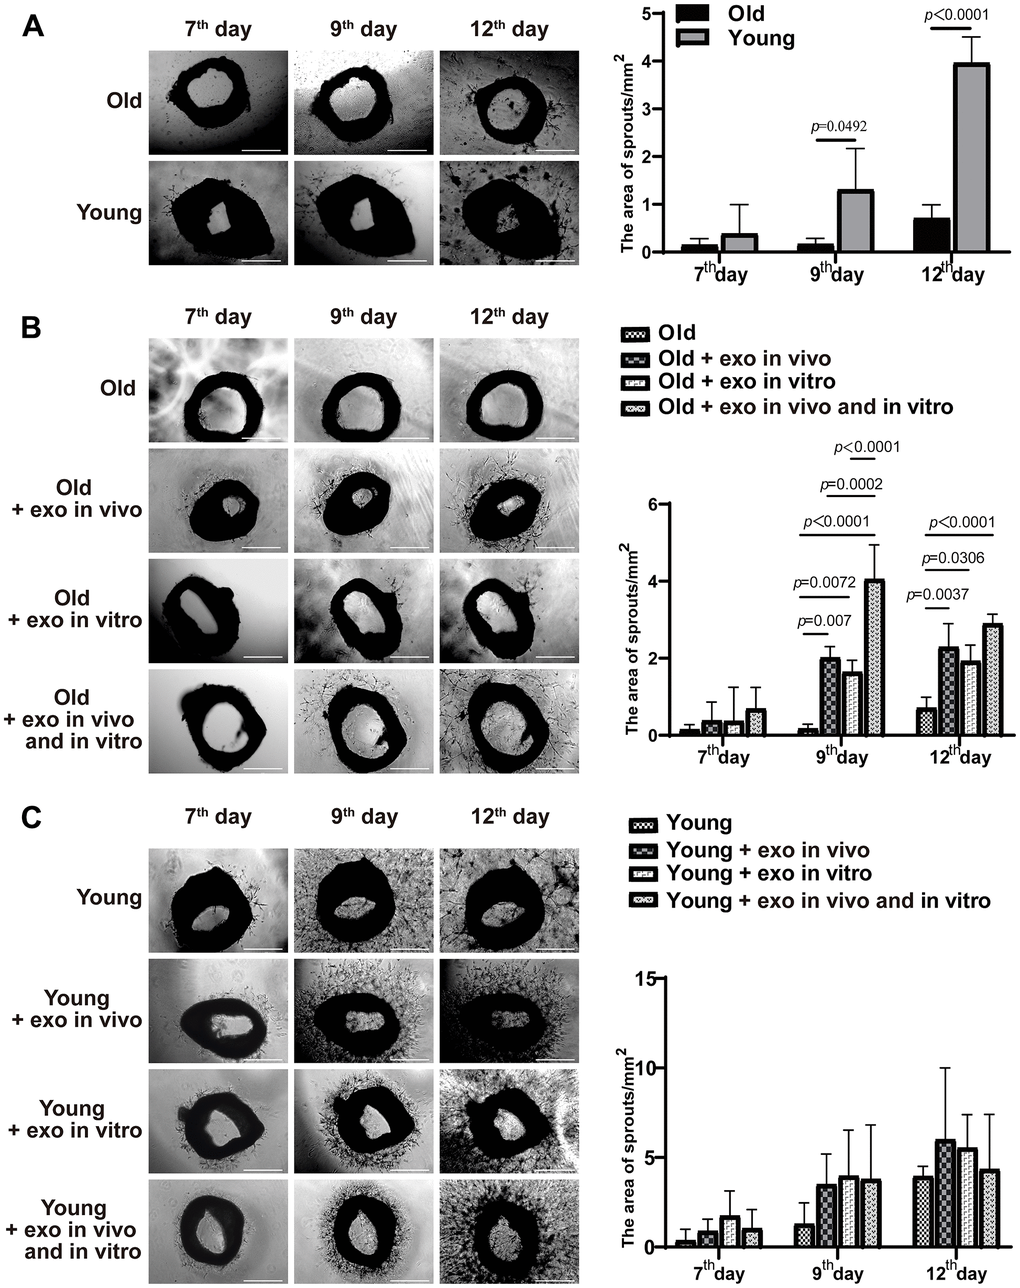 iPSC-derived exosomes significantly increased the neovascularization of aortic rings in old mice. (A) The accumulated neovascularized area of the aortic rings of untreated young mice were significantly higher than that of untreated old mice. (B) Effects of iPSC-derived exosomes on angiogenesis of aortic ring in old mice. Old: the aortic rings of untreated old mice; Old + exo in vivo: the aortic rings of old mice pre-treated with iPSC-derived exosomes by tail vein injection; Old + exo in vitro: the aortic rings of old mice were cultured with iPSC-exosomes in vitro; Old + exo in vivo and exo in vitro: the aortic rings of old mice pre-treated with iPSC-derived exosomes via tail vein injection were cultured with iPSC-derived exosomes in vitro. (C) Effects of iPSC-exosomes on angiogenesis of aortic ring in young mice. Young: the aortic rings of untreated young mice; Young + exo in vivo: the aortic rings of young mice pre-treated with iPSC-derived exosomes via tail vein injection; Young + exo in vitro: the aortic rings of untreated young mice were cultured with iPSC-exosomes in vitro; Young + exo in vivo and exo in vitro: the aortic rings of young mice pre-treated with iPSC-derived exosomes via tail vein injection were cultured with iPSC-exosomes in vitro. Scale bar, 500 μm. Quantification of the area of aortic ring is presented in the right panel. iPSCs, induced pluripotent stem cells; exo, exosomes.